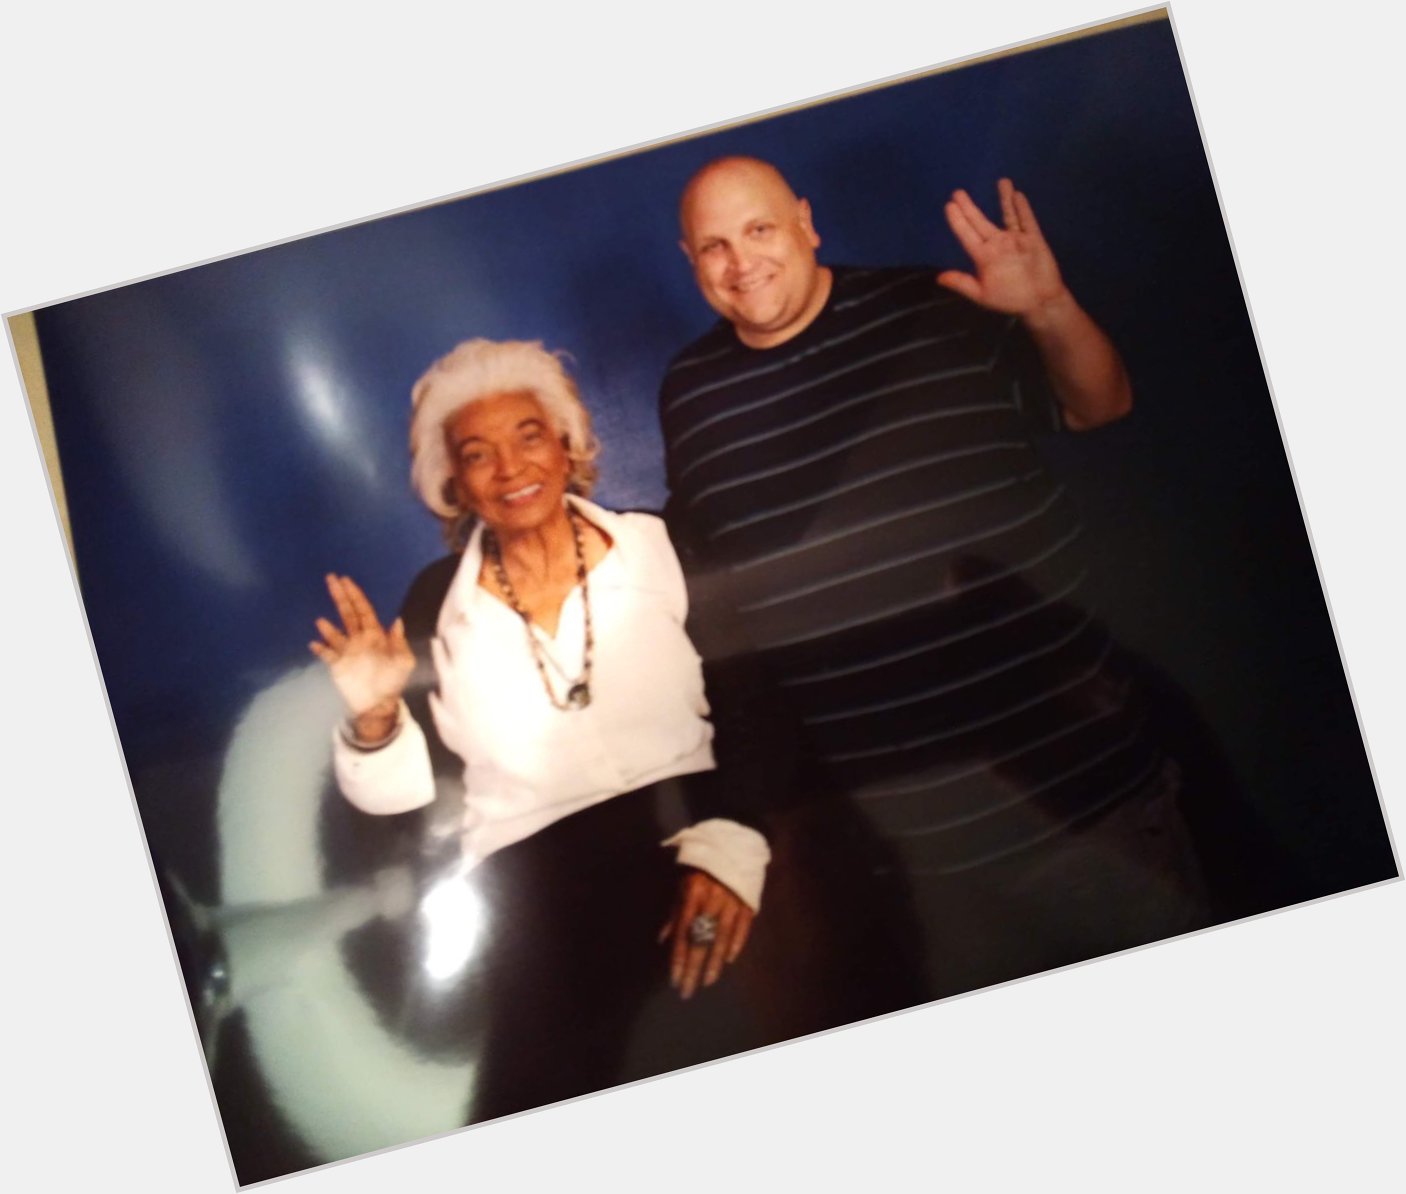 Happy 87th Birthday, Nichelle Nichols! So honored to have met you this year in Las Vegas!!!! 